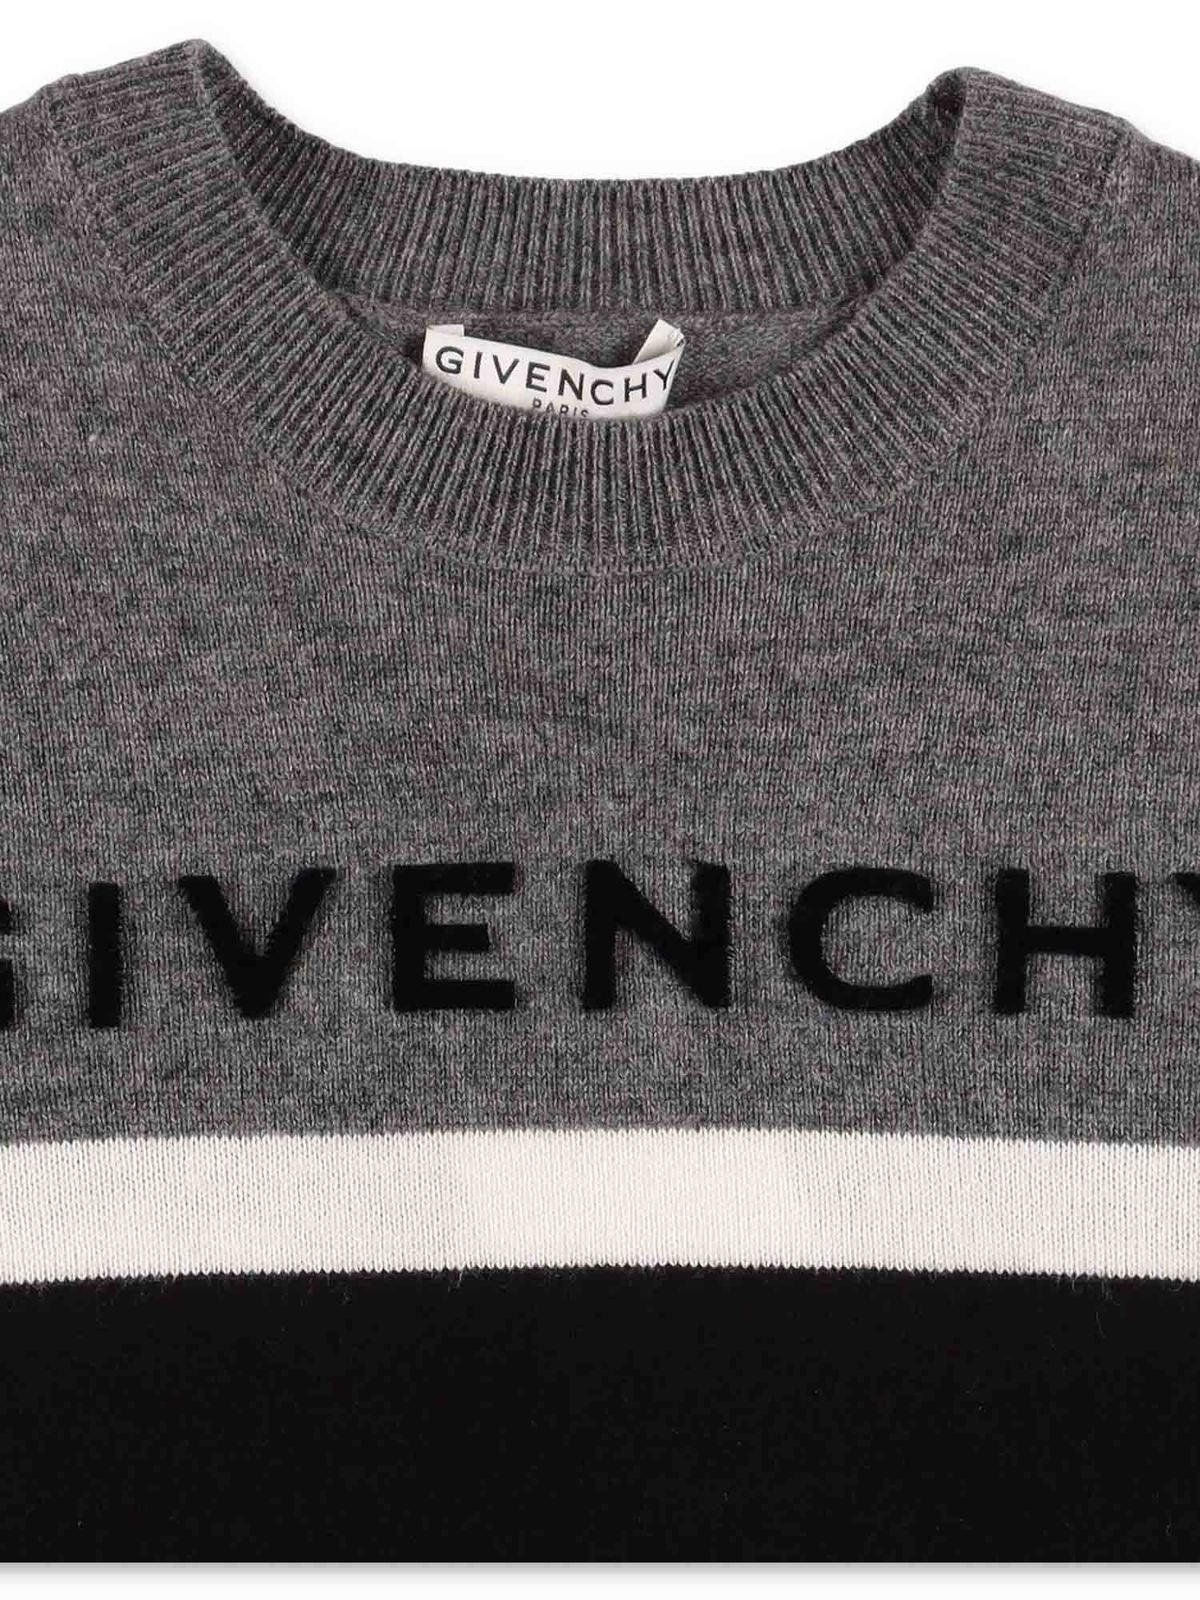 https://images.thebestshops.com/product_images/original/givenchy-online-knitwear-black-and-gray-sweater-with-logo-00000230198f00s002.jpg